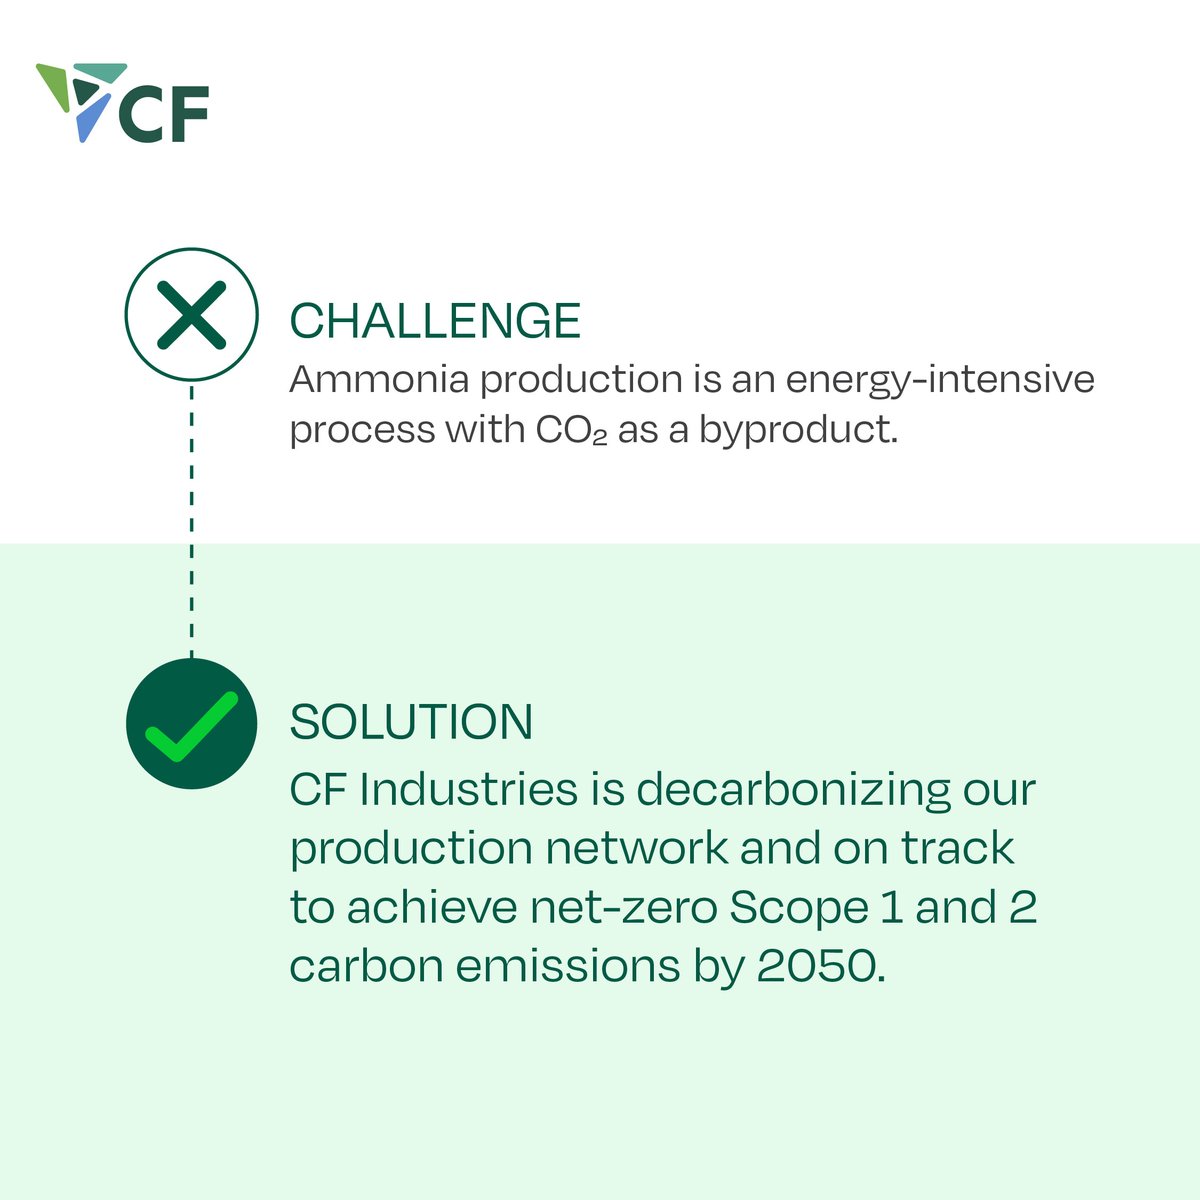 Conventional ammonia production is an energy-intensive process with CO2 as a byproduct. We're investing to reduce those emissions.